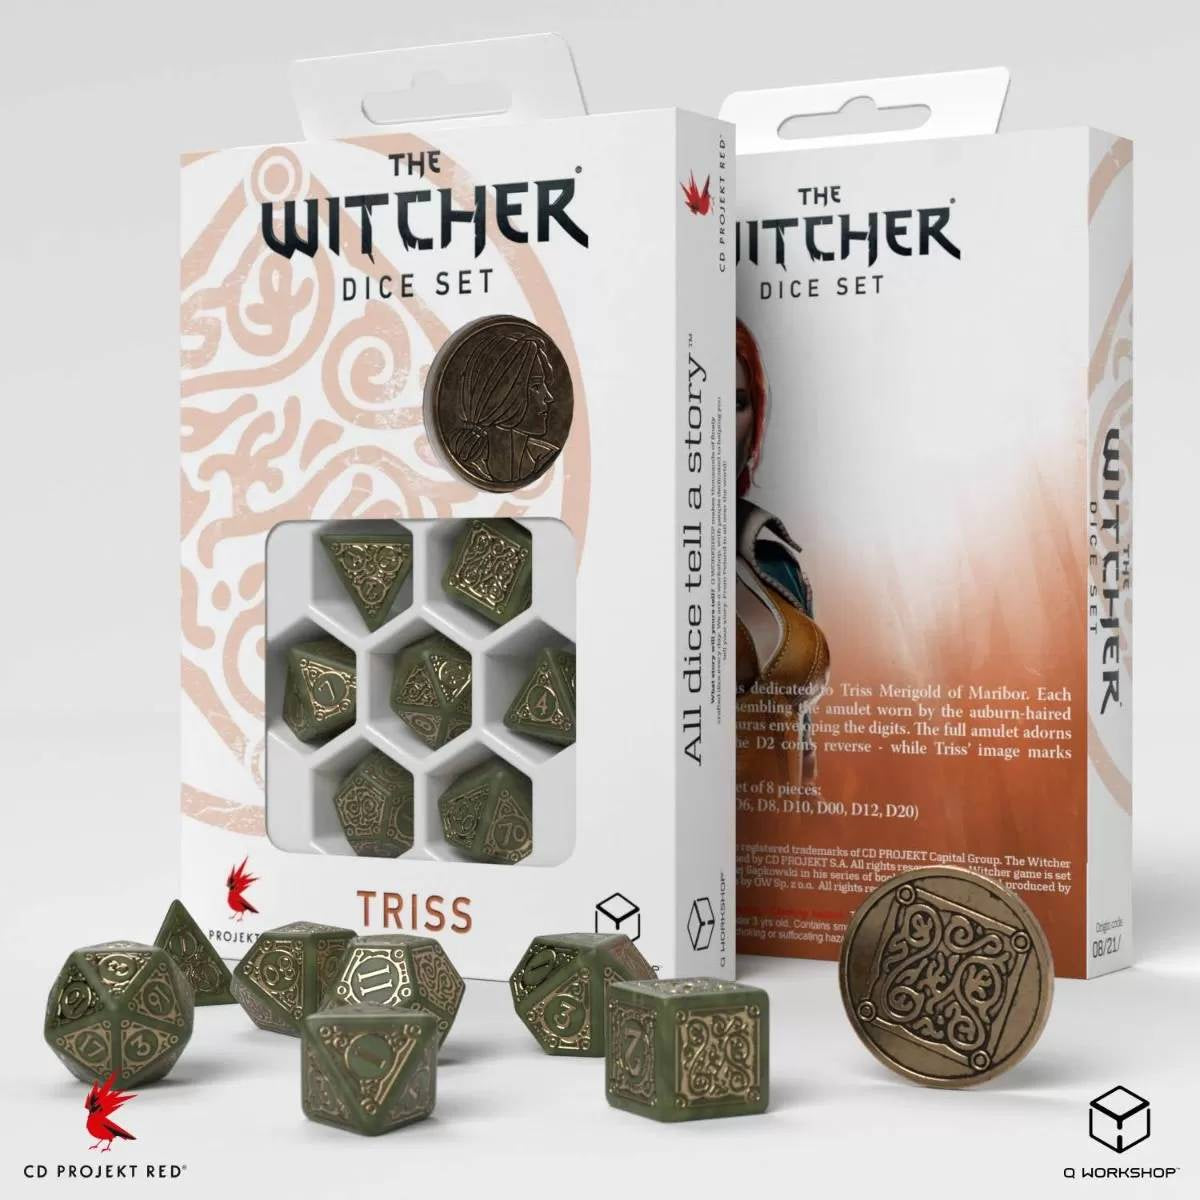 Q Workshop - The Witcher Dice Set Triss - The Fourteenth of the Hill